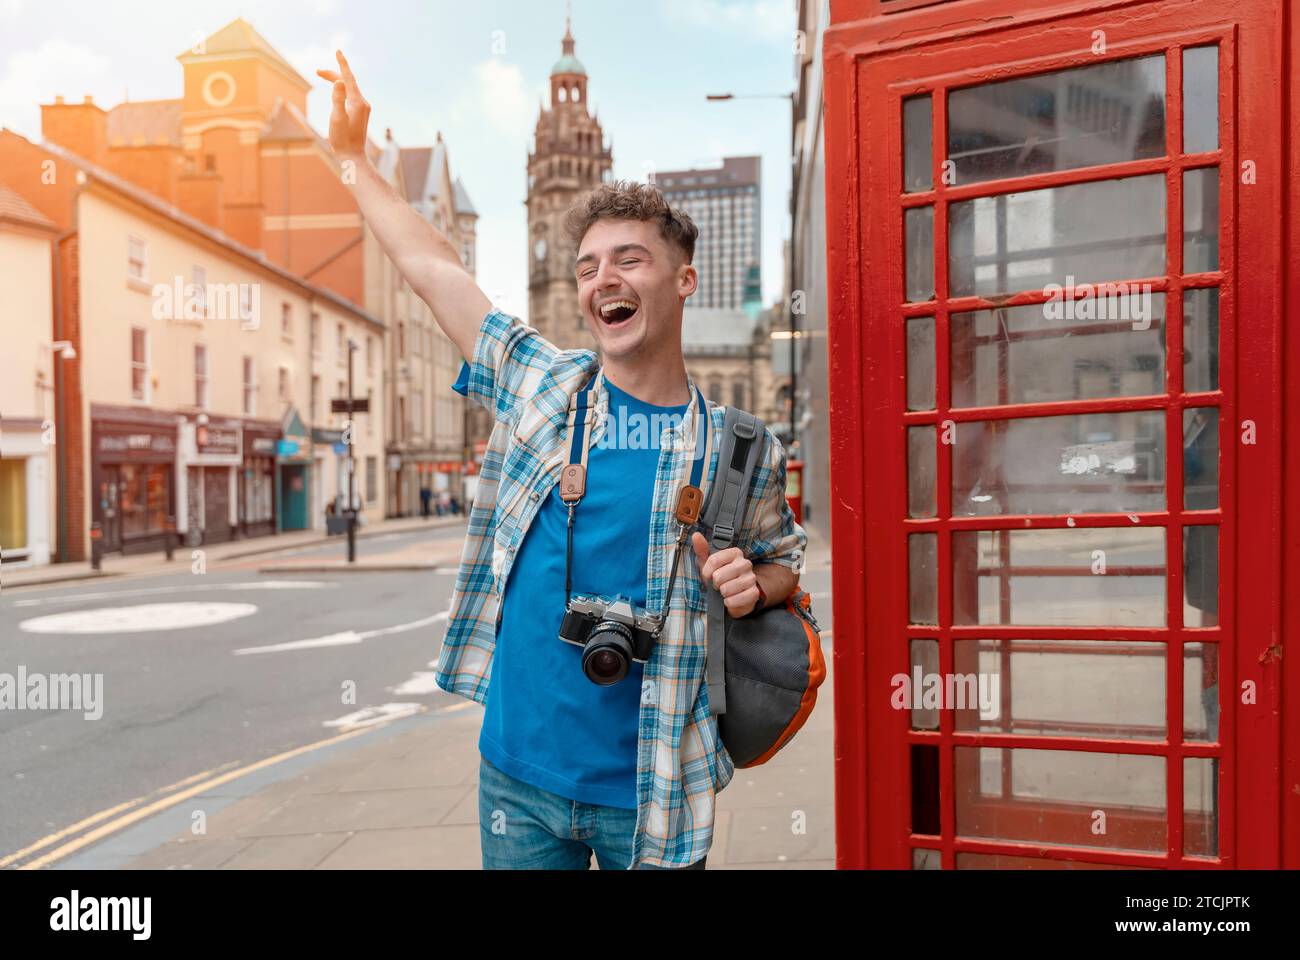 Outdoor portrait of man using a camera and taking photos against a red phonebox in the city of England Enjoying travel concept Stock Photo